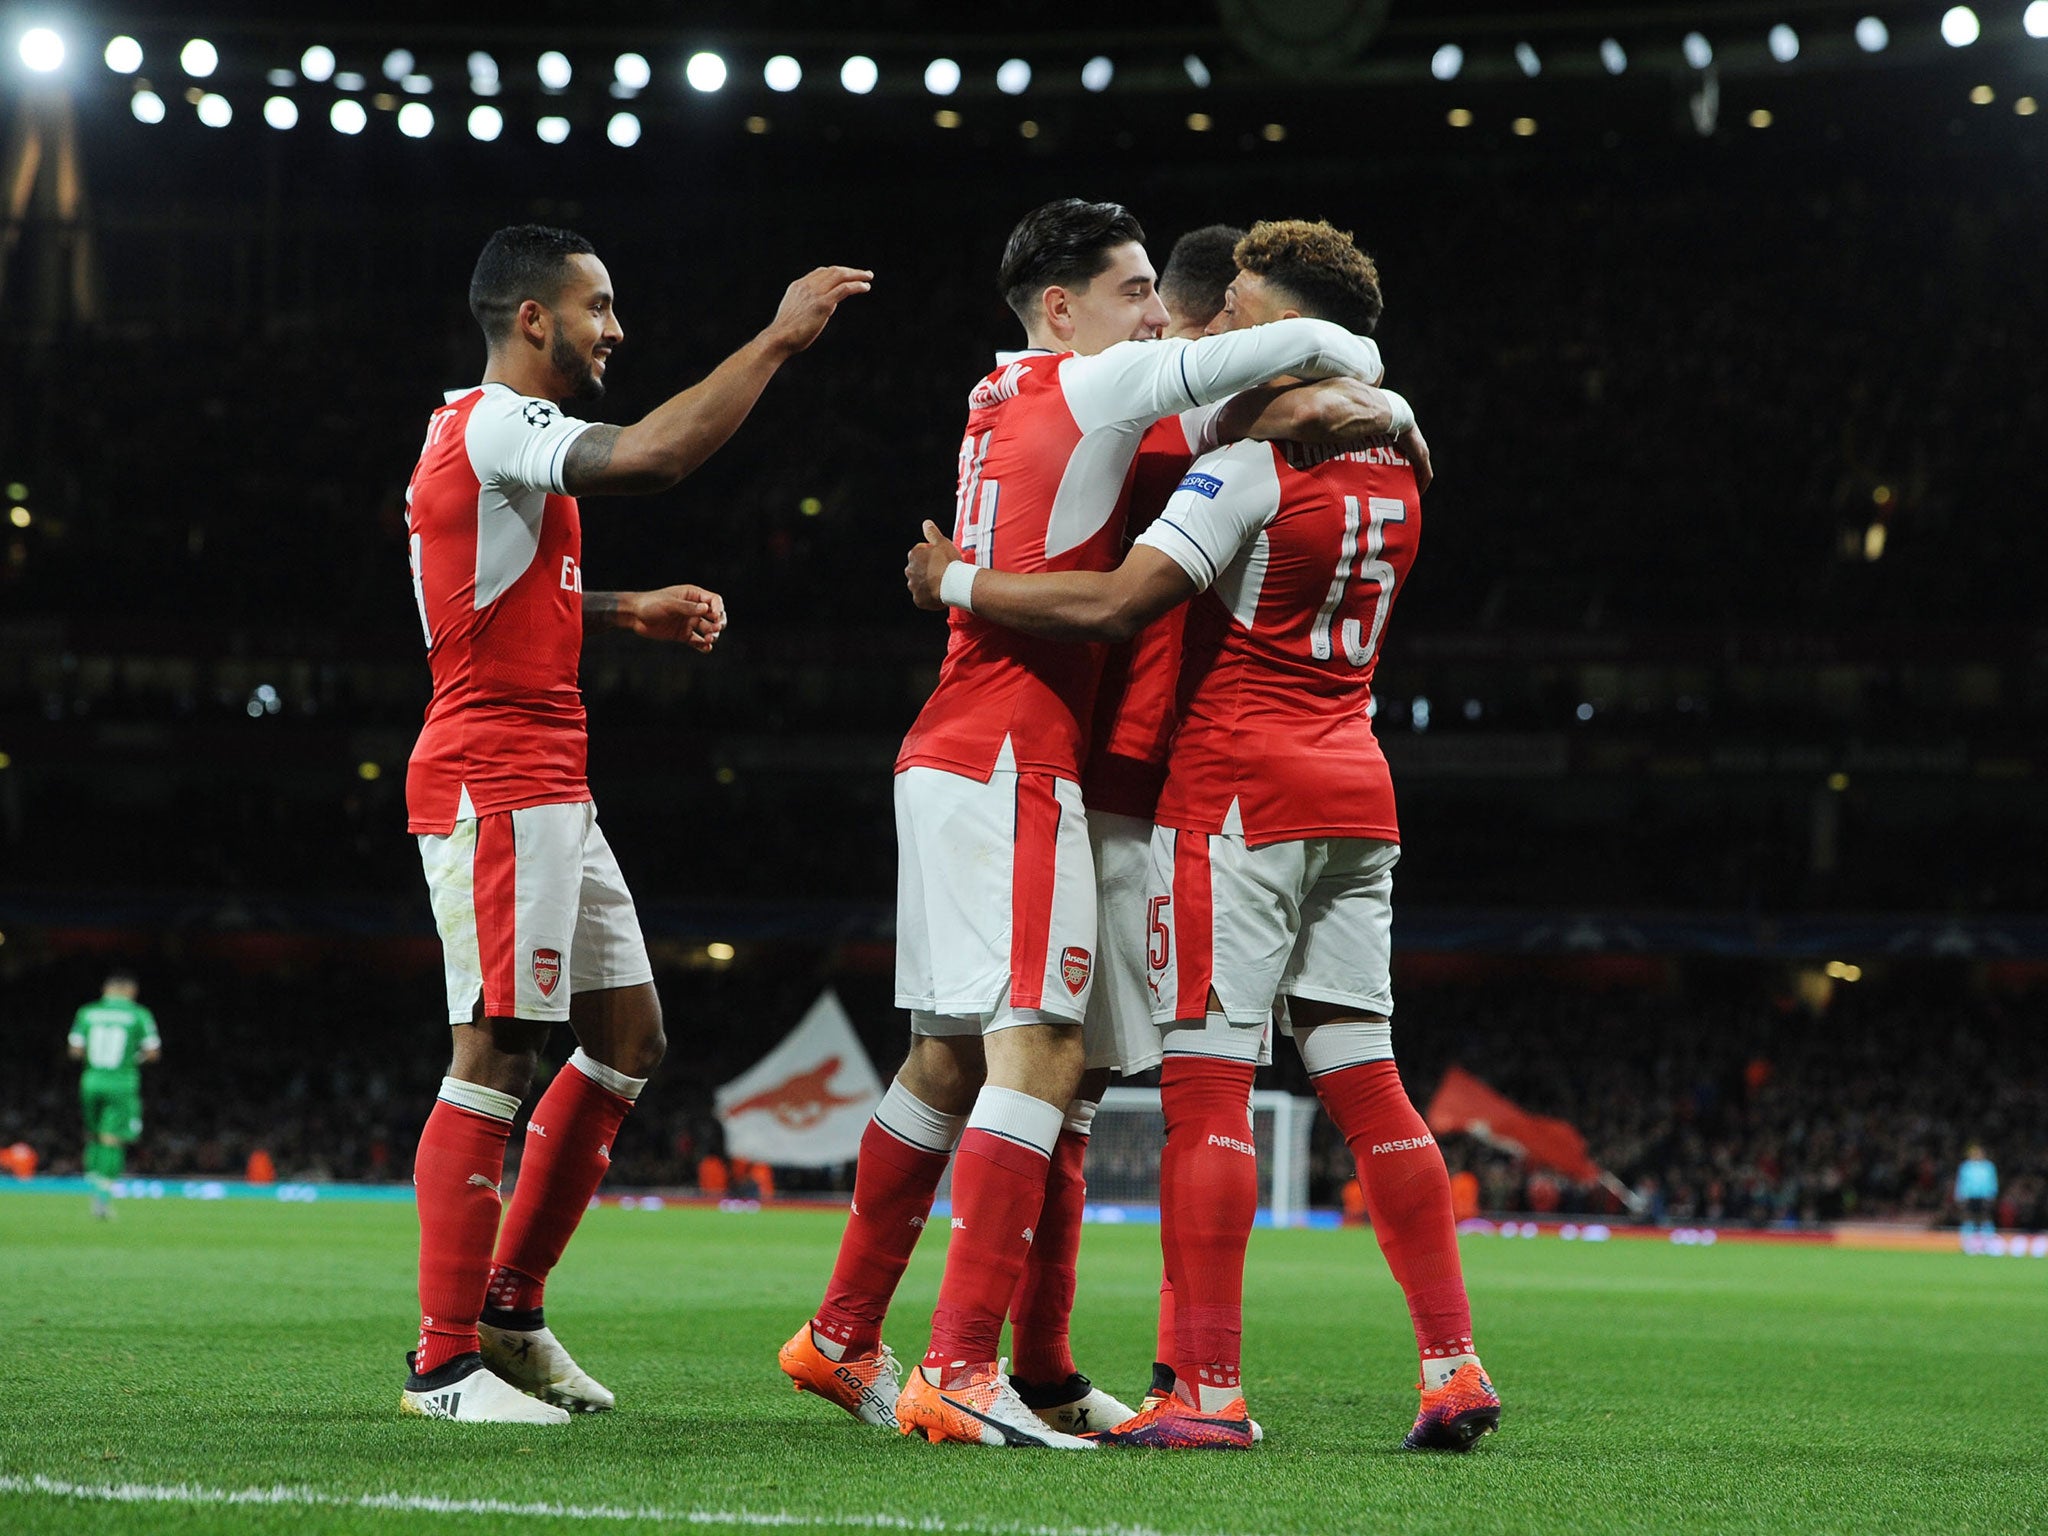 Arsenal became the first English side in this year's competition to qualify for the last-16